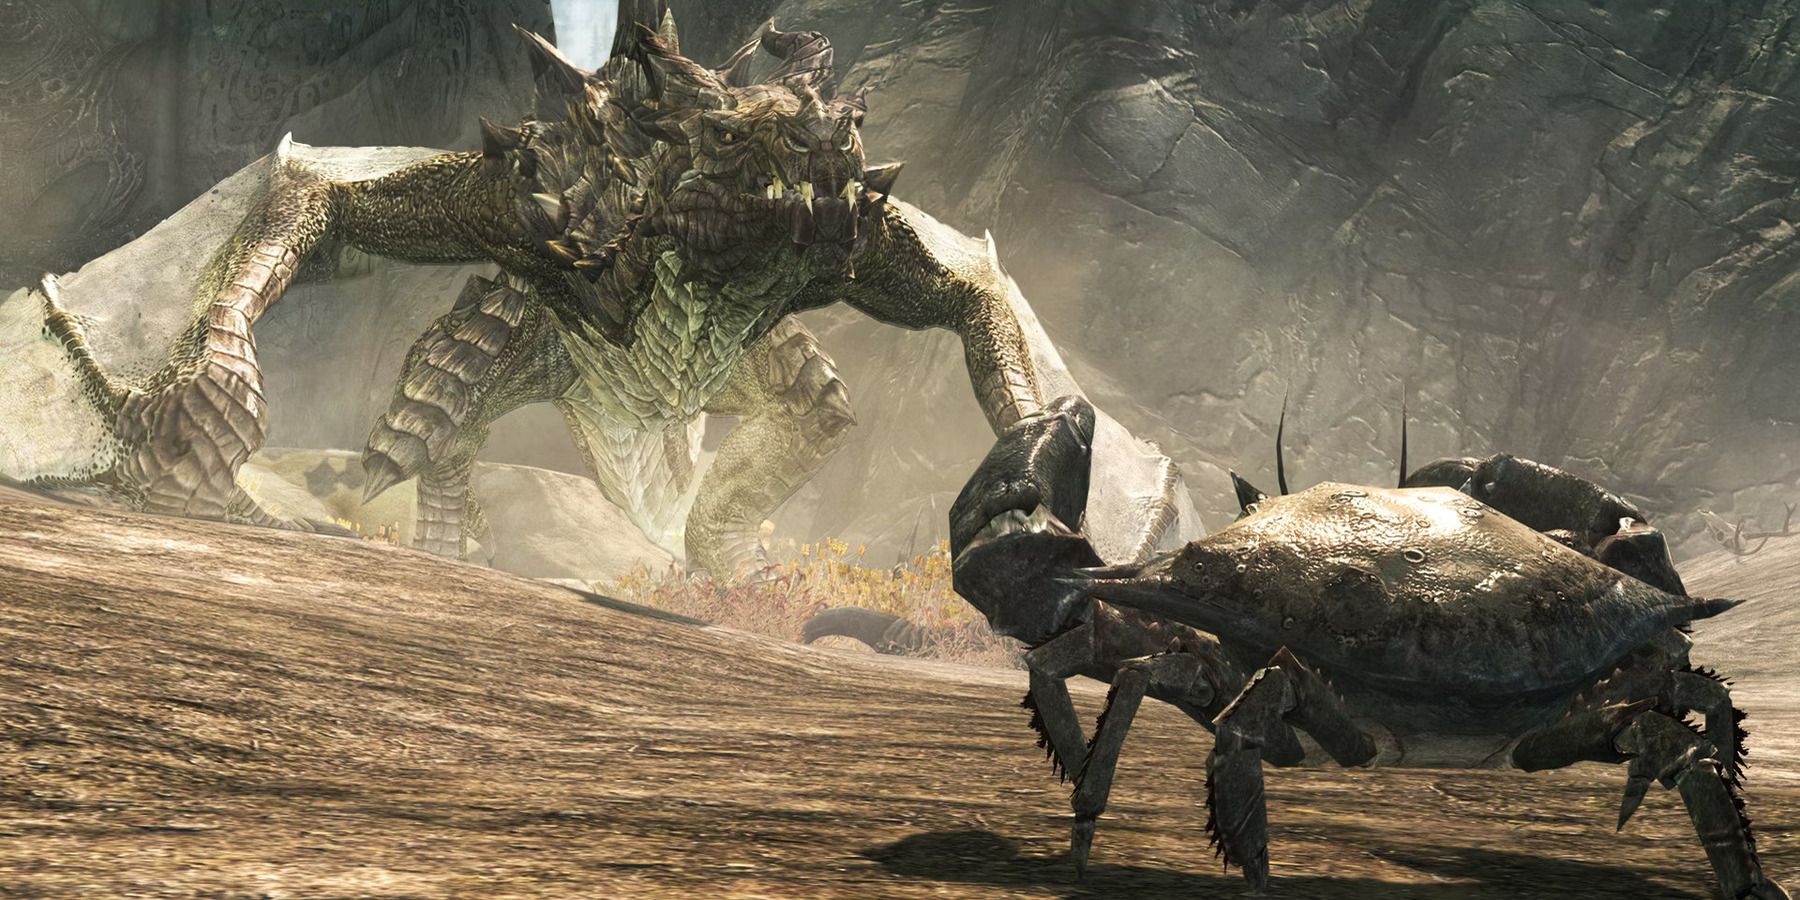 Skyrim Player Encounters Hilarious Fight Between Mudcrab and Thalmor Justicar